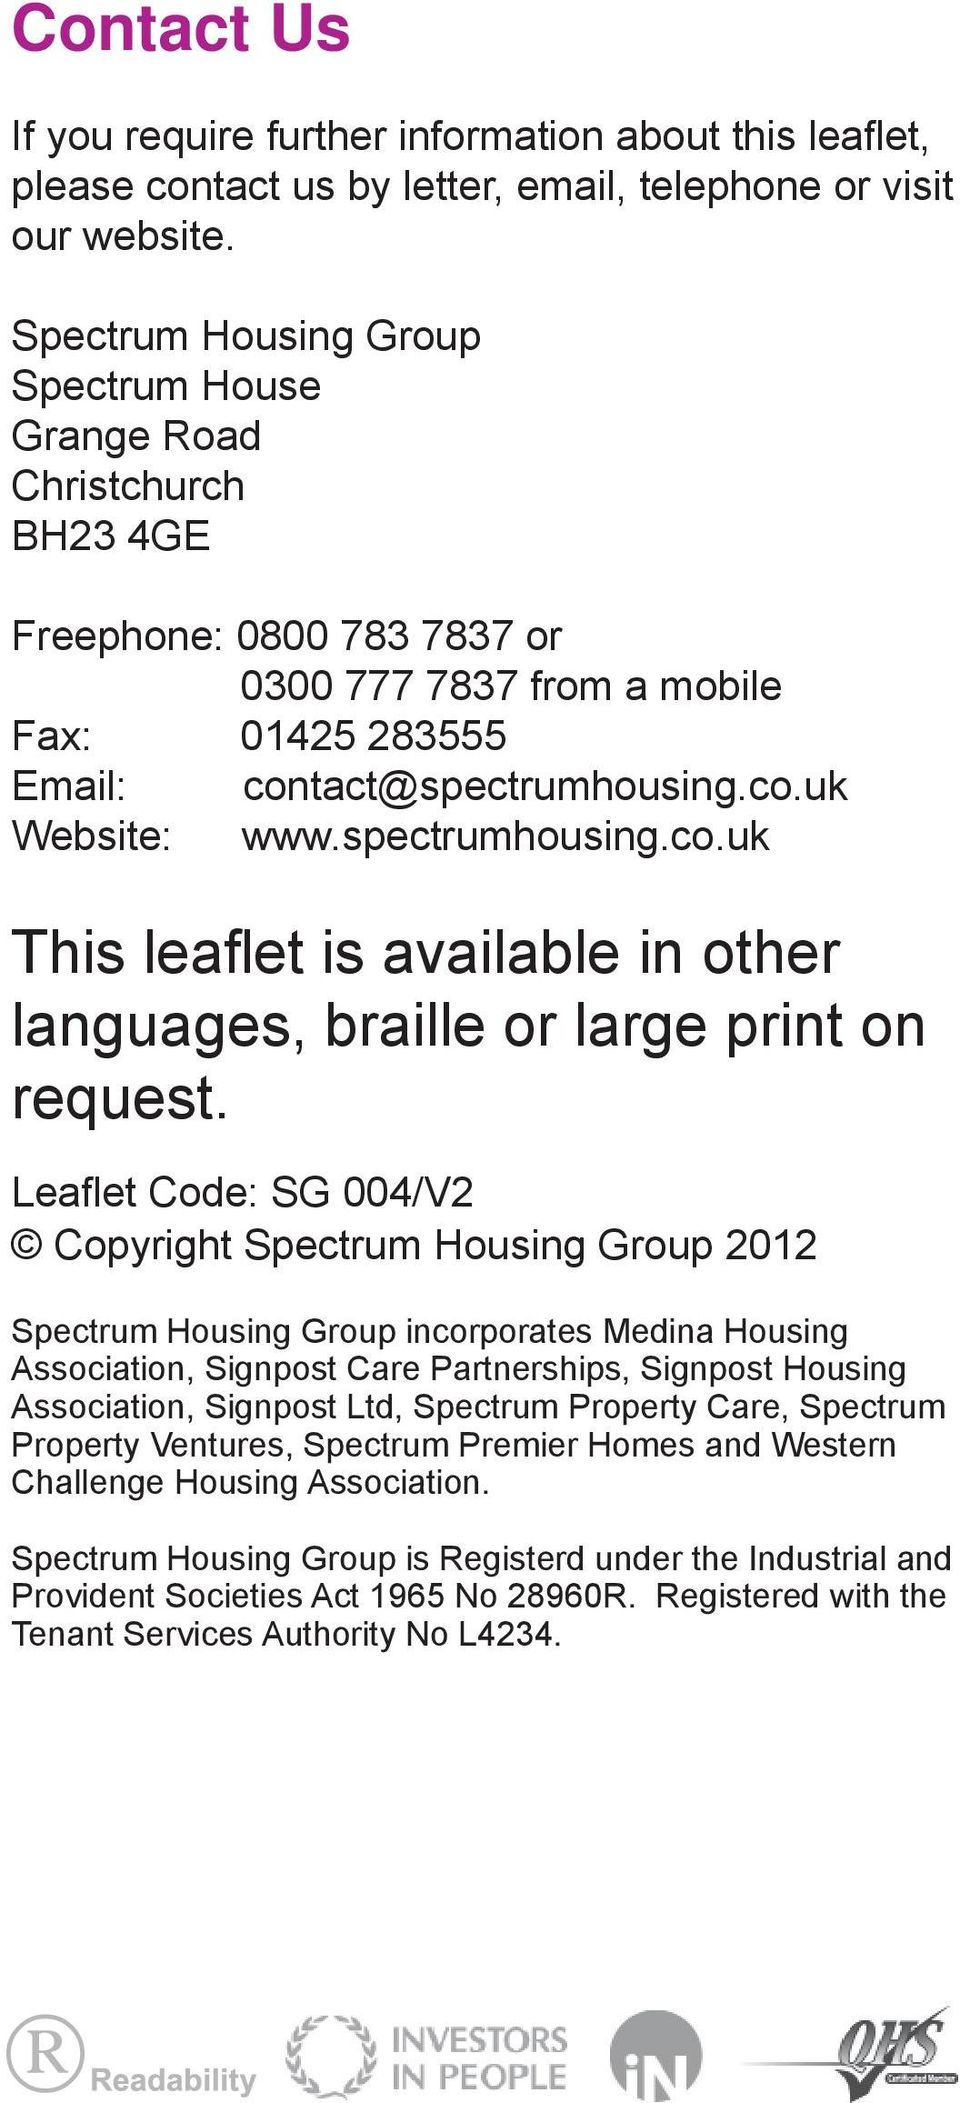 spectrumhousing.co.uk This leafl et is available in other languages, braille or large print on request.